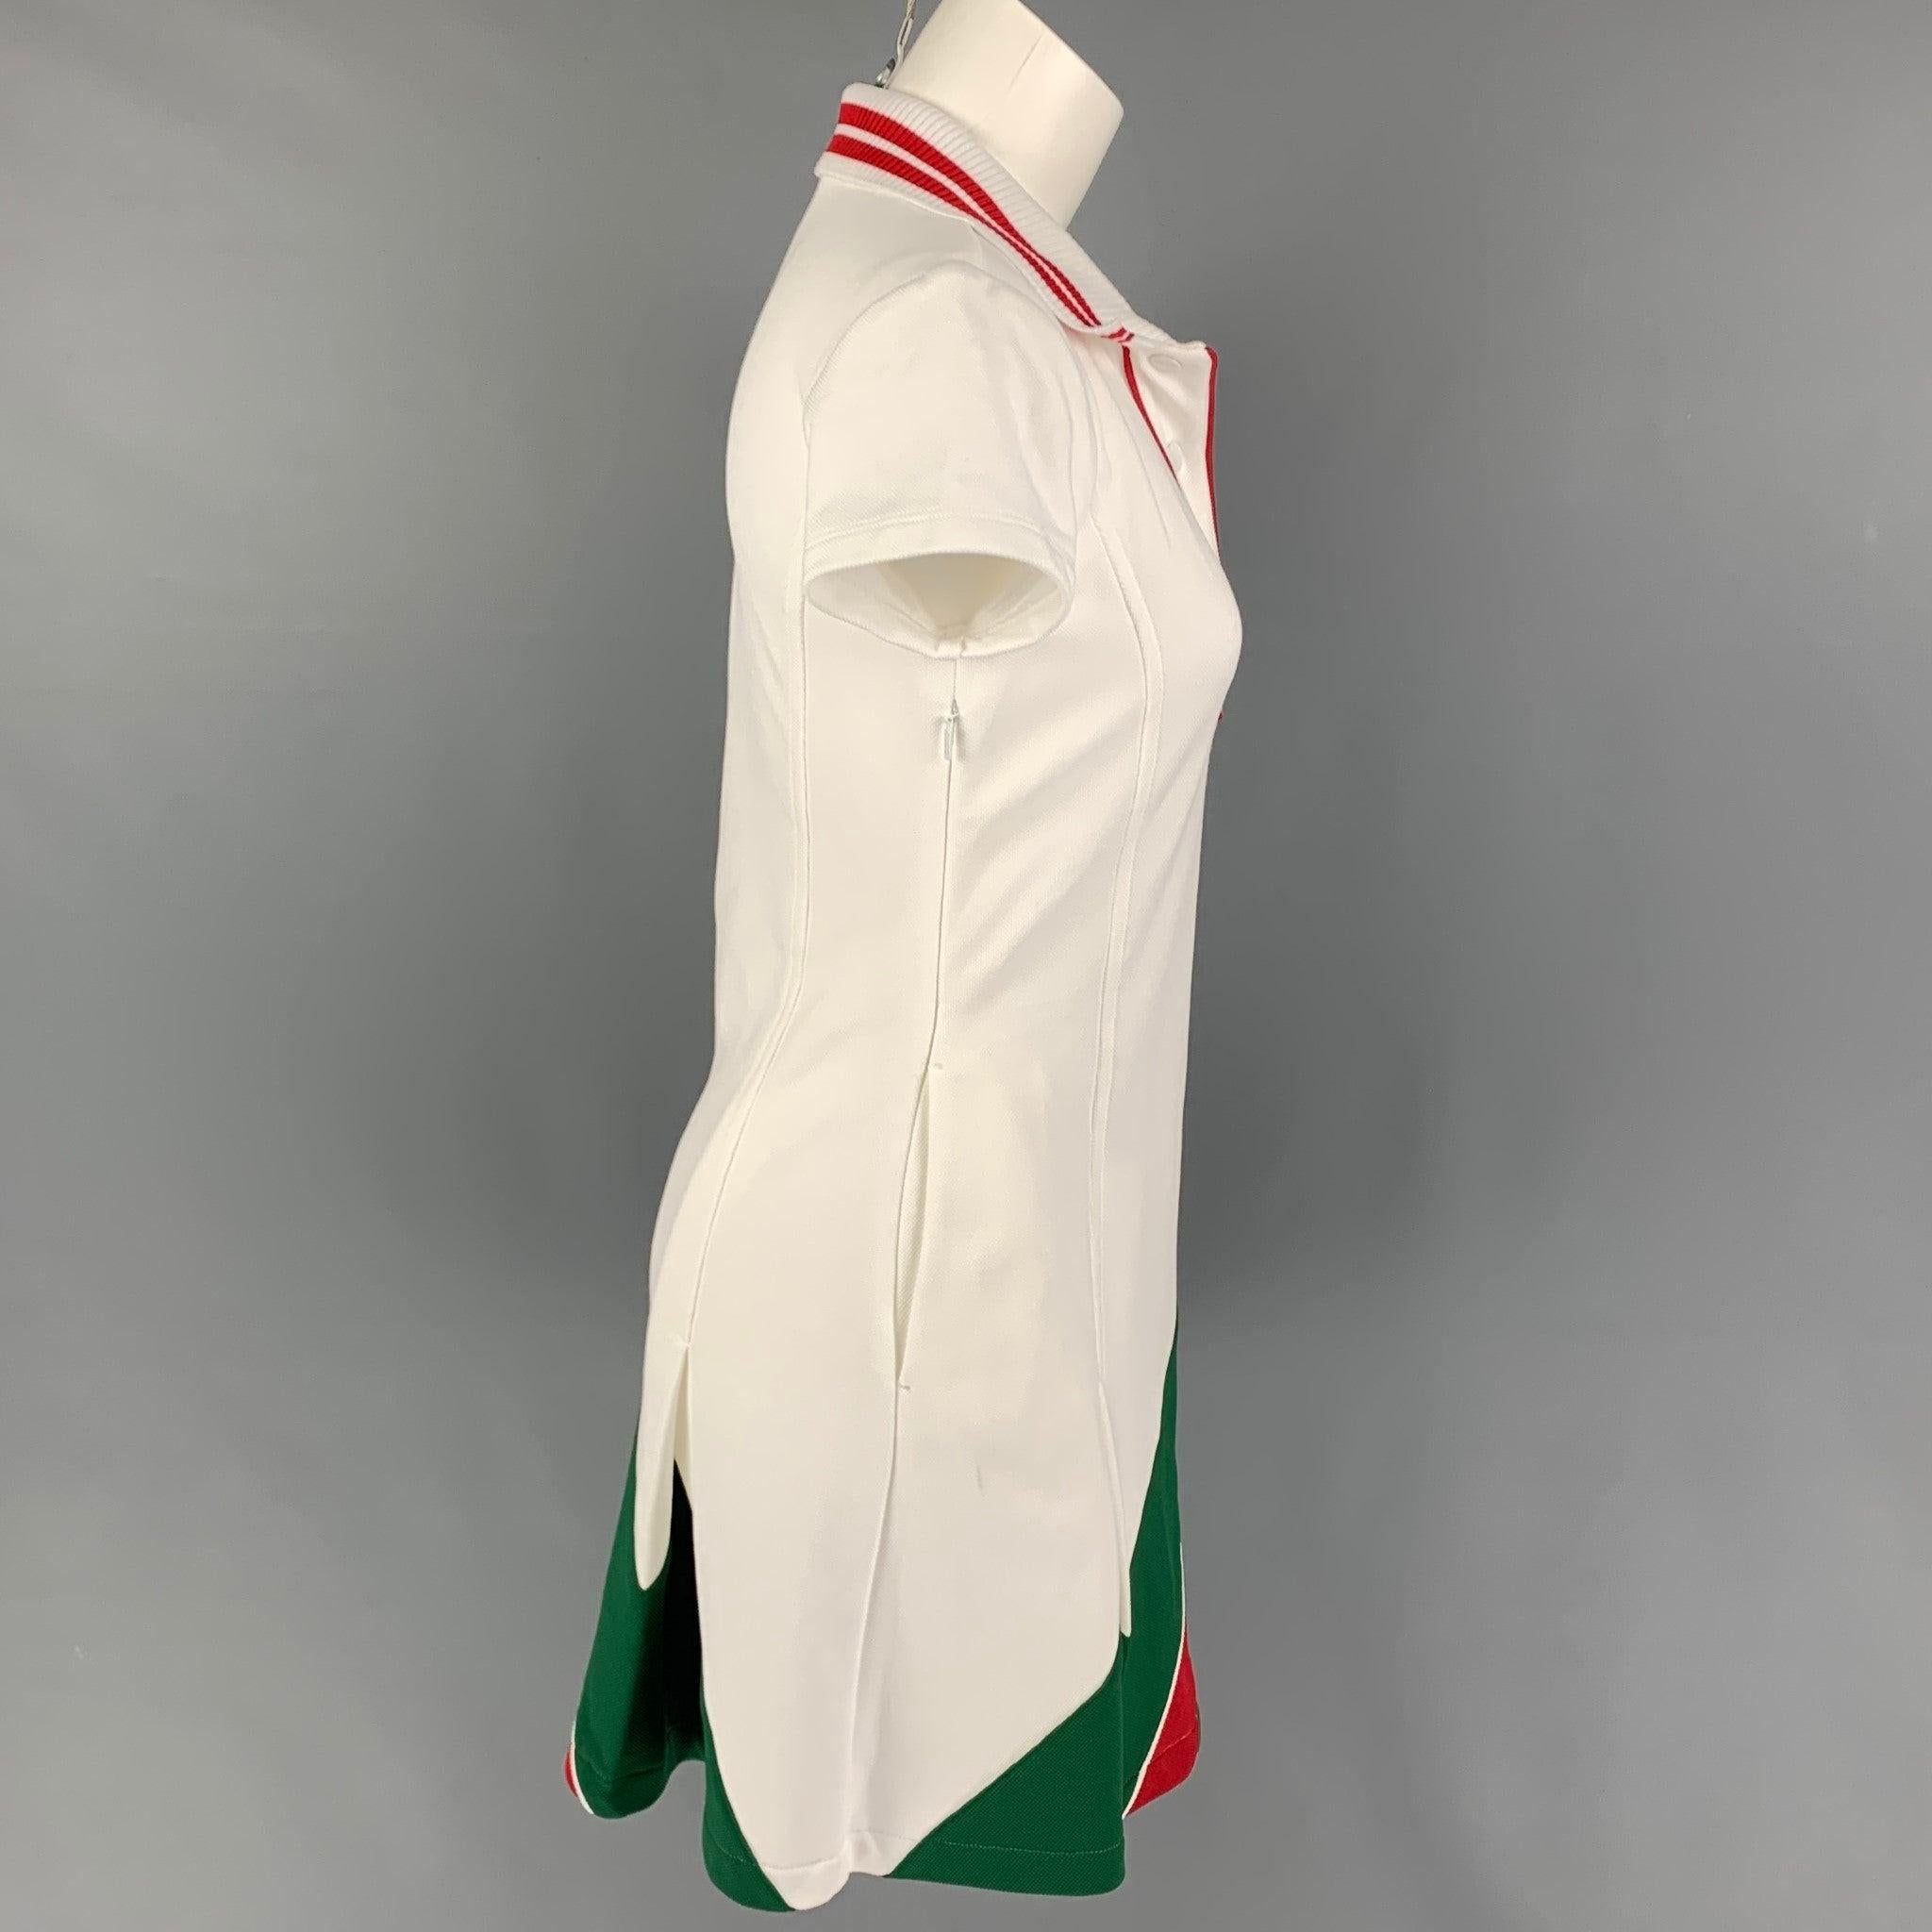 GUCCI 'Web Stripe' mini dress comes in a white pique cotton featuring a vintage tennis style, iconic web stripe, interlocking GG patch, spread collar, and a snap button closure. Made in Italy.
Very Good
Pre-Owned Condition. Light marks at front.